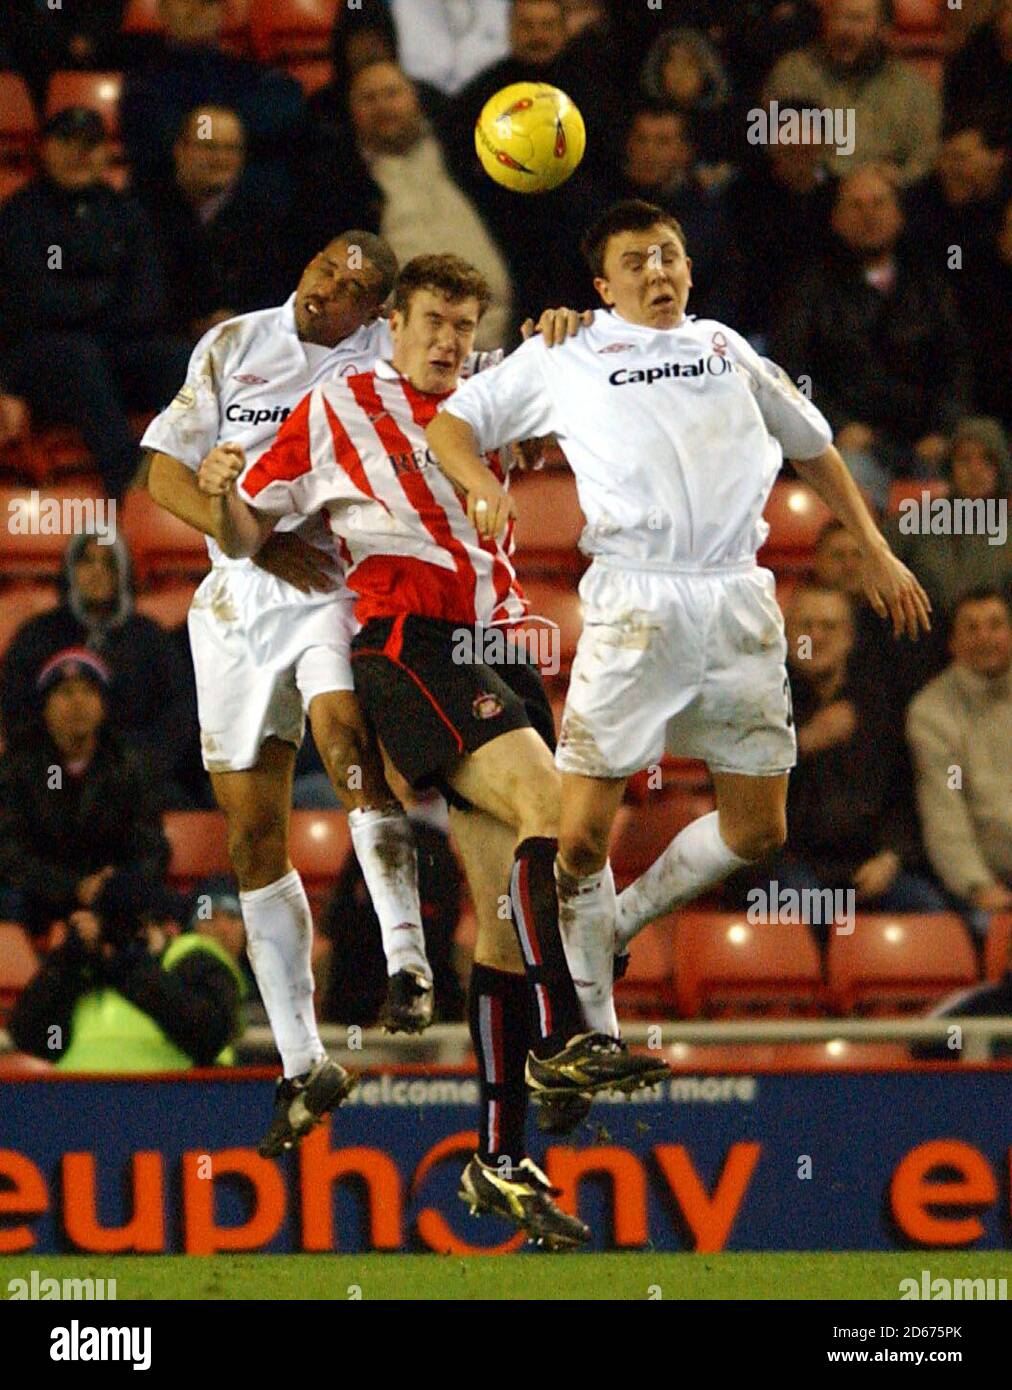 Sunderland's Kevin Kyle battles for the ball in the air with Nottingham Forest's Des Walker (l) and Gregor Robertson (r) Stock Photo